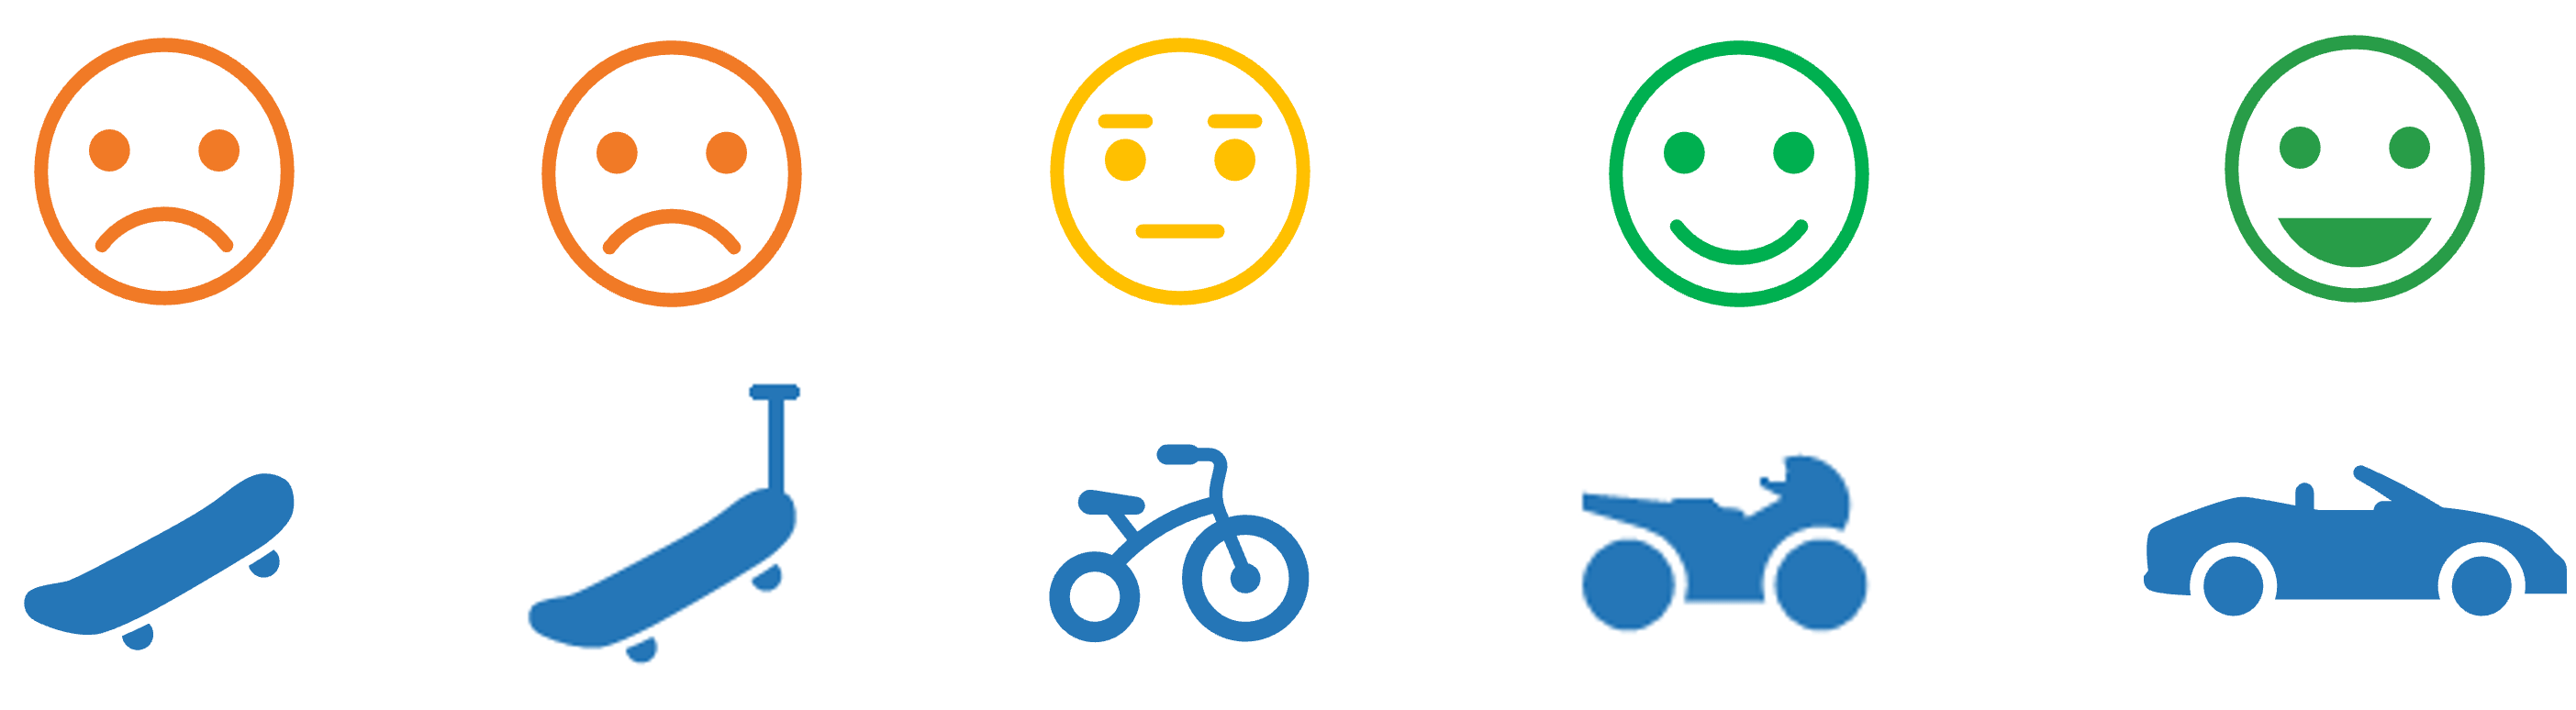 Five-part image with 'Unhappy face - skateboard', 'Unhappy face - scooter', 'Neutral face - bicycle', 'Happy face - motorcycle', 'Ecstatic face - sports car'.